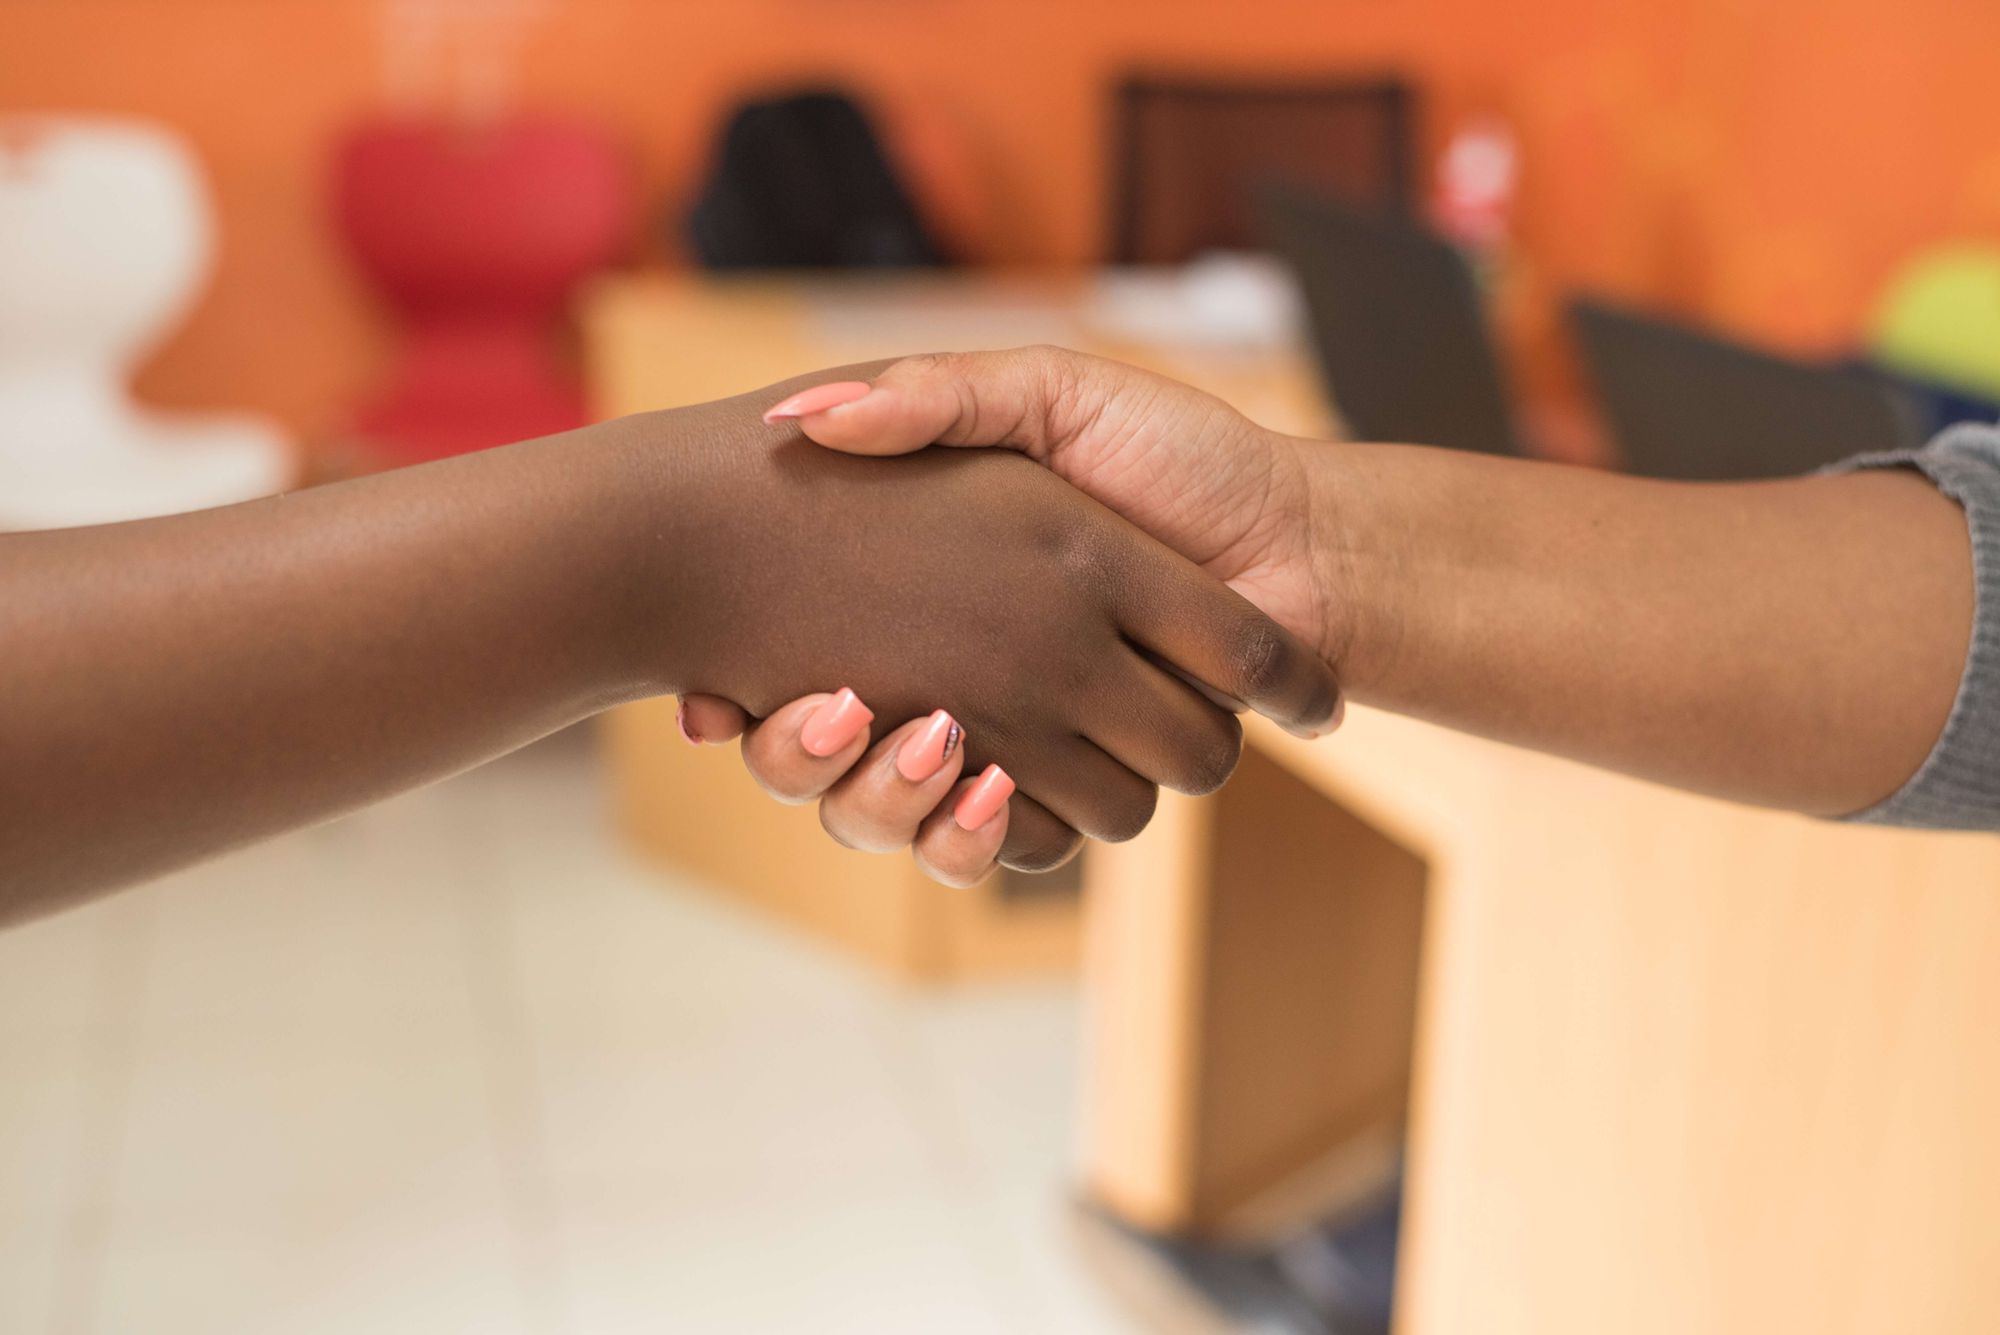 Close-up photo of two people shaking hands: hand on the left is dark-skinned; hand on the right it lighter skinned and has long fingernails painted pink.